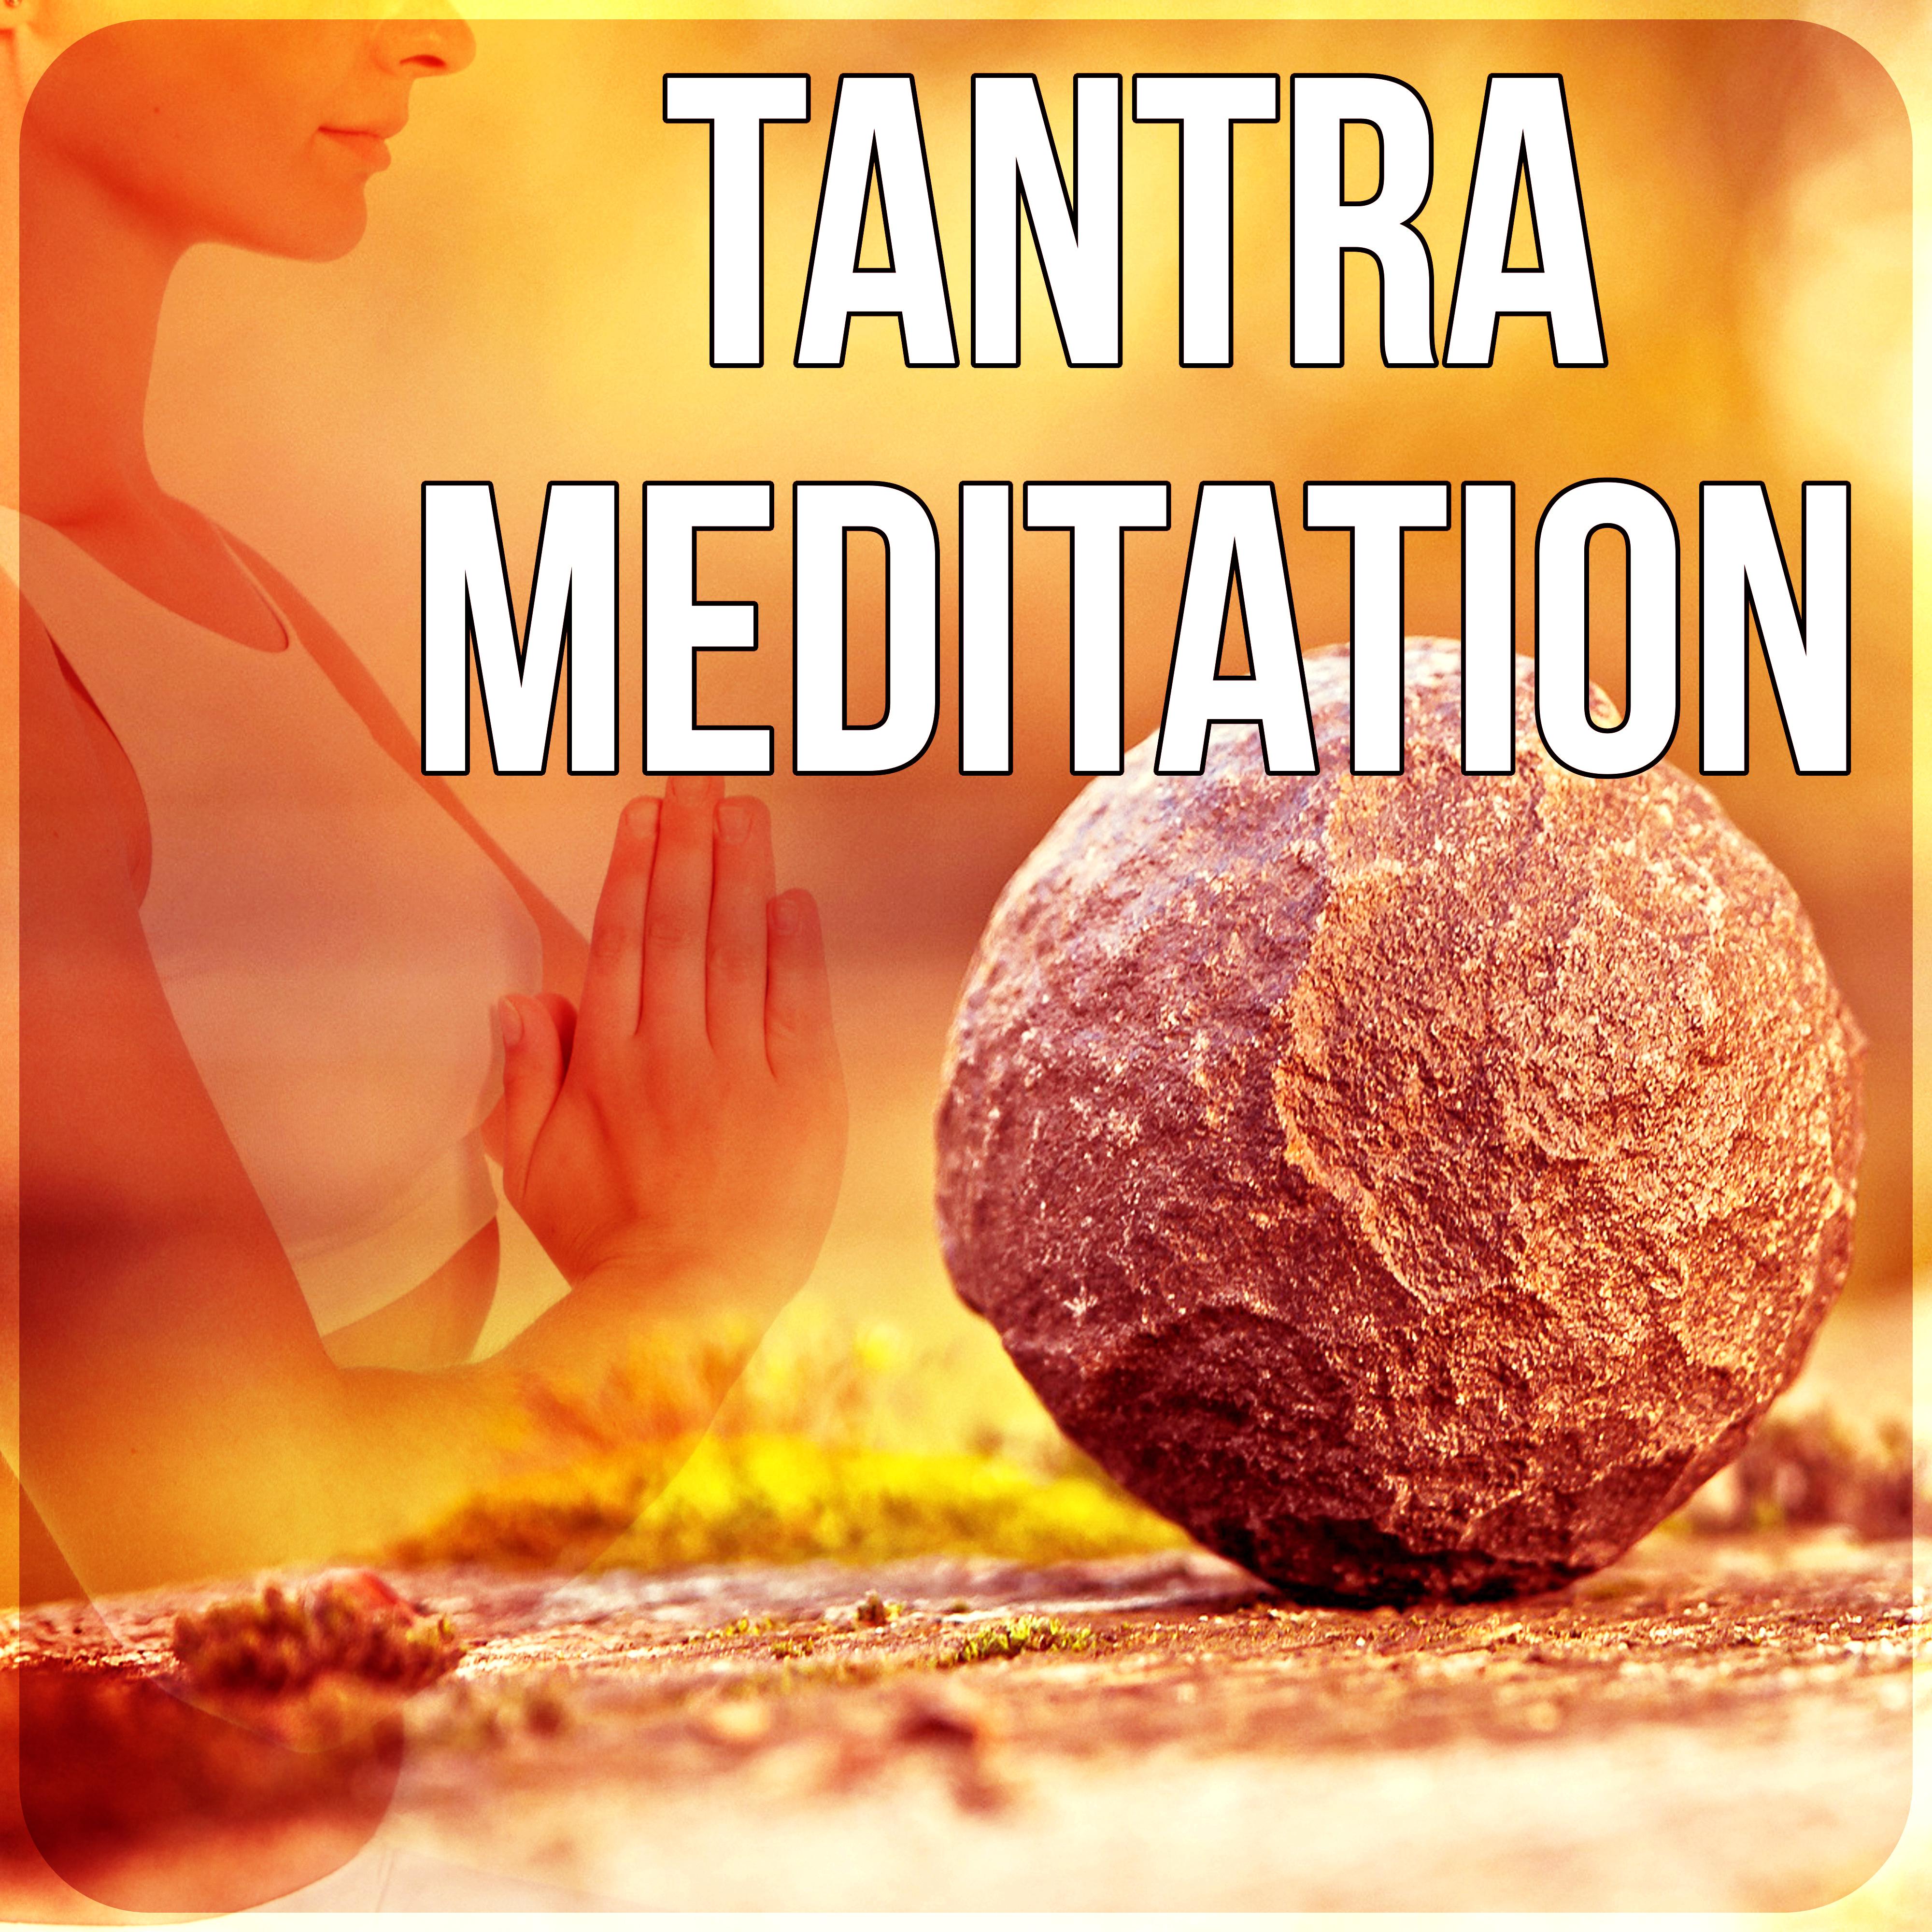 Tantra Meditation - Nature Sounds, Mindfulness Meditation & Relaxation with Flute Music